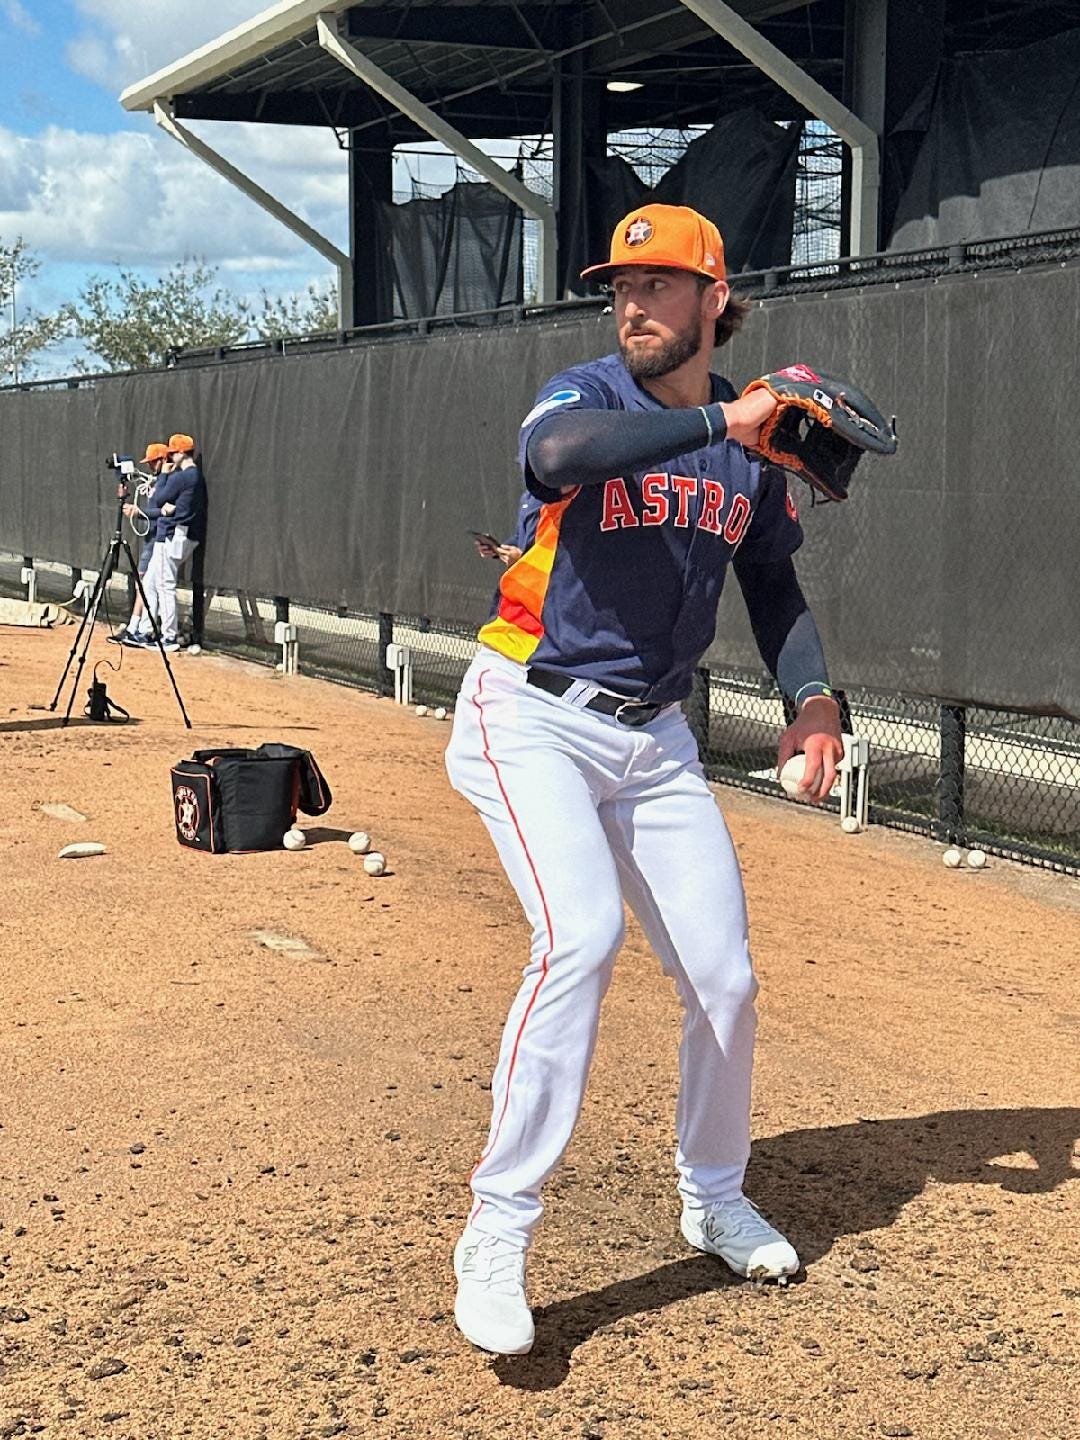 Benjamin's Bennett Sousa returns home to fight for place with Astros